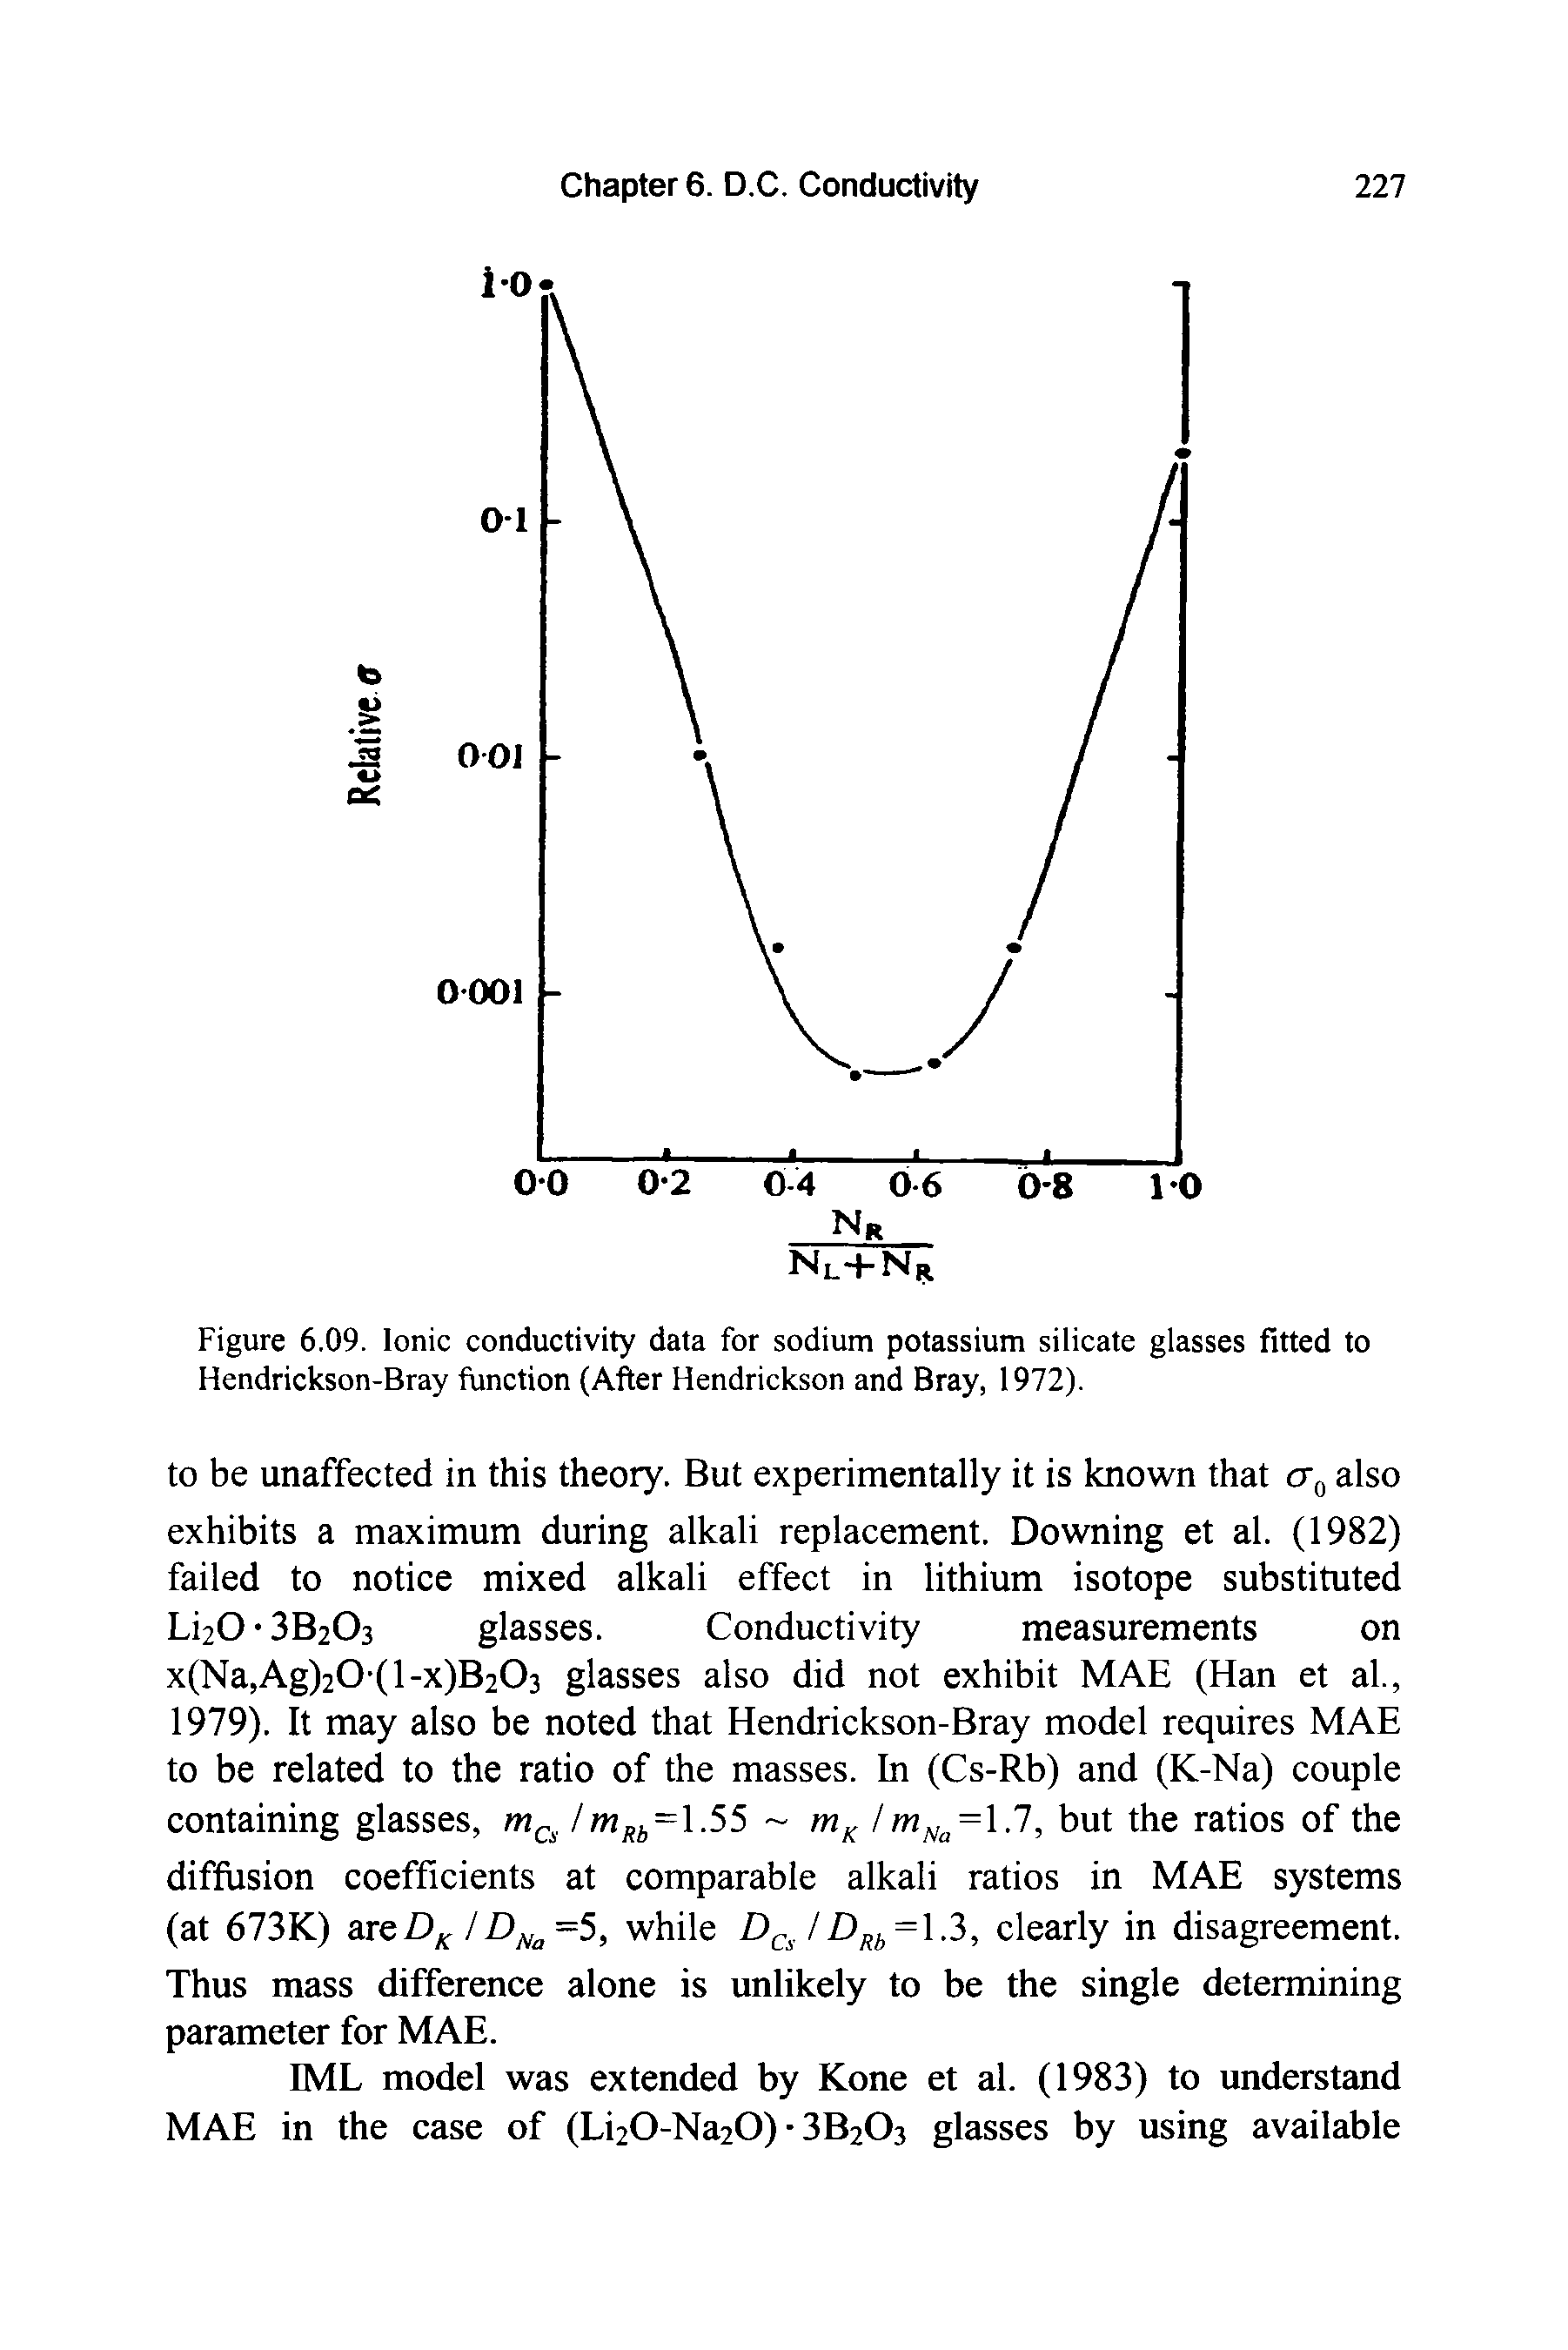 Figure 6.09. Ionic conductivity data for sodium potassium silicate glasses fitted to Hendrickson-Bray function (After Hendrickson and Bray, 1972).